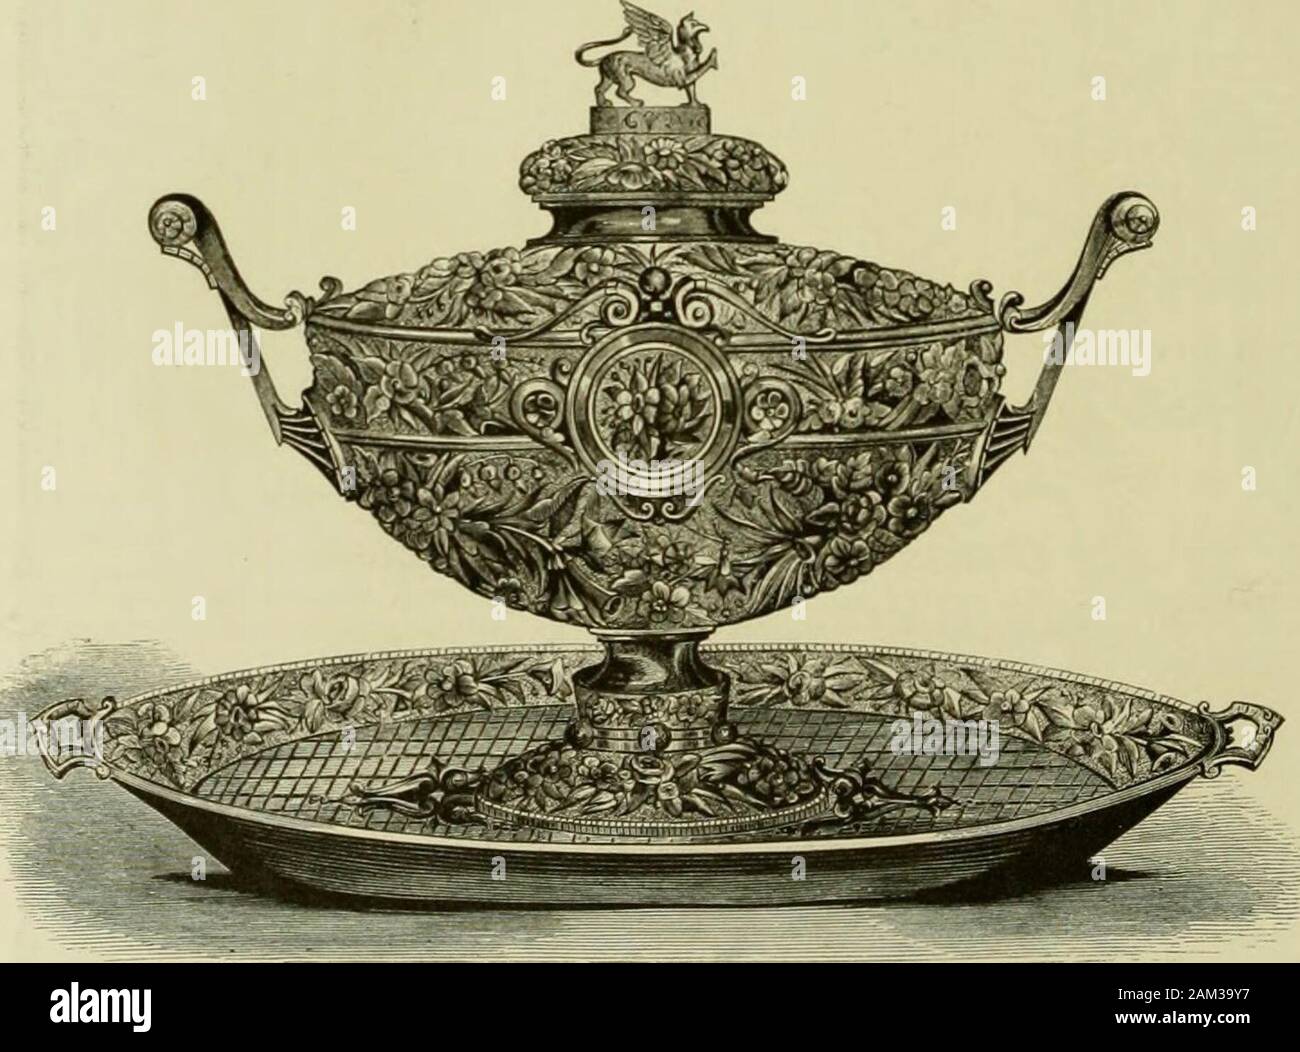 The masterpieces of the Centennial international exhibition of 1876 .. . Entree Dish, Kepoussi Hilver: y. 1£. Caldwell &= Co.. Tureen and Salver, Repousse Silver: J. E. Caldwell &= Co. the work of Messrs. Allen & Brother, of Fhilaijelphl^. The leaves of thisdoor are composed of highly-polished walnut, with ornamented panels of alter-nate strips of precious woods of different colors, giving a pleasing relief and INDUSTRIAL ART. 41 effect of light and shade. Scroll patterns and some curved lines are introducedinto the lock-rail and break the severity of the outlines. On each of the mainpanels a Stock Photo